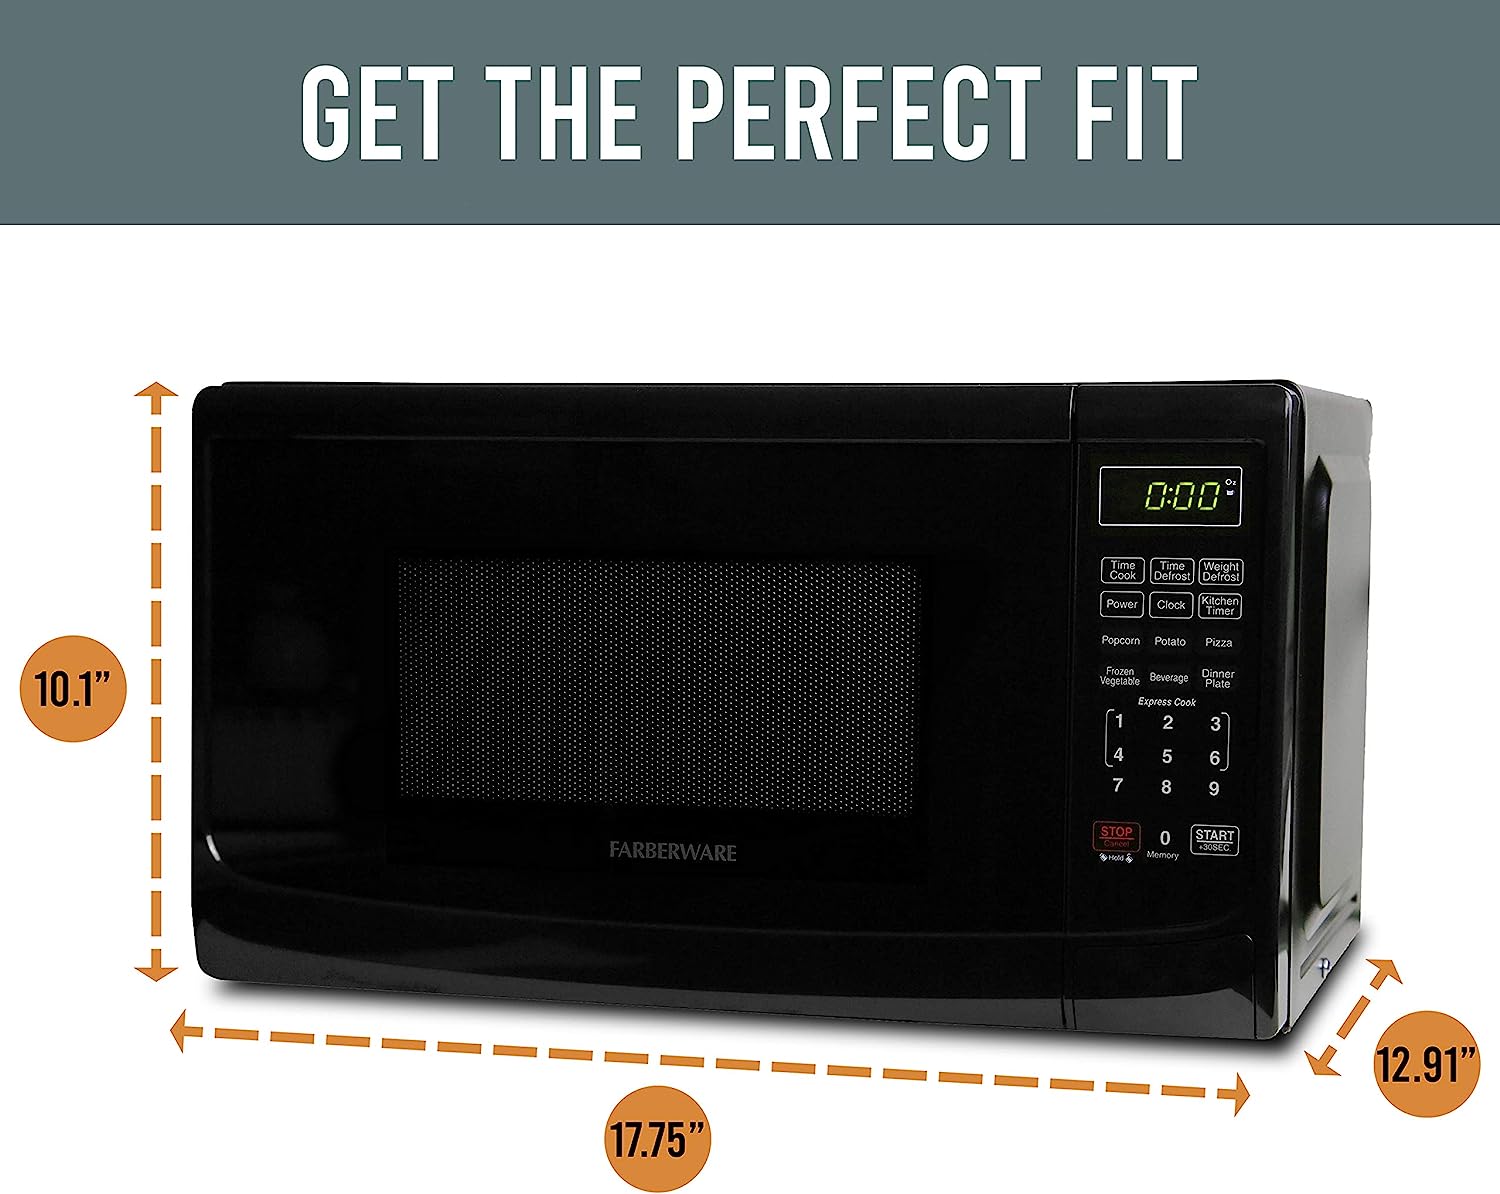 BLACK+DECKER Compact Countertop Microwave Oven 0.7 Cu. Ft. 700-Watts with  LED Lighting, Child Lock, White